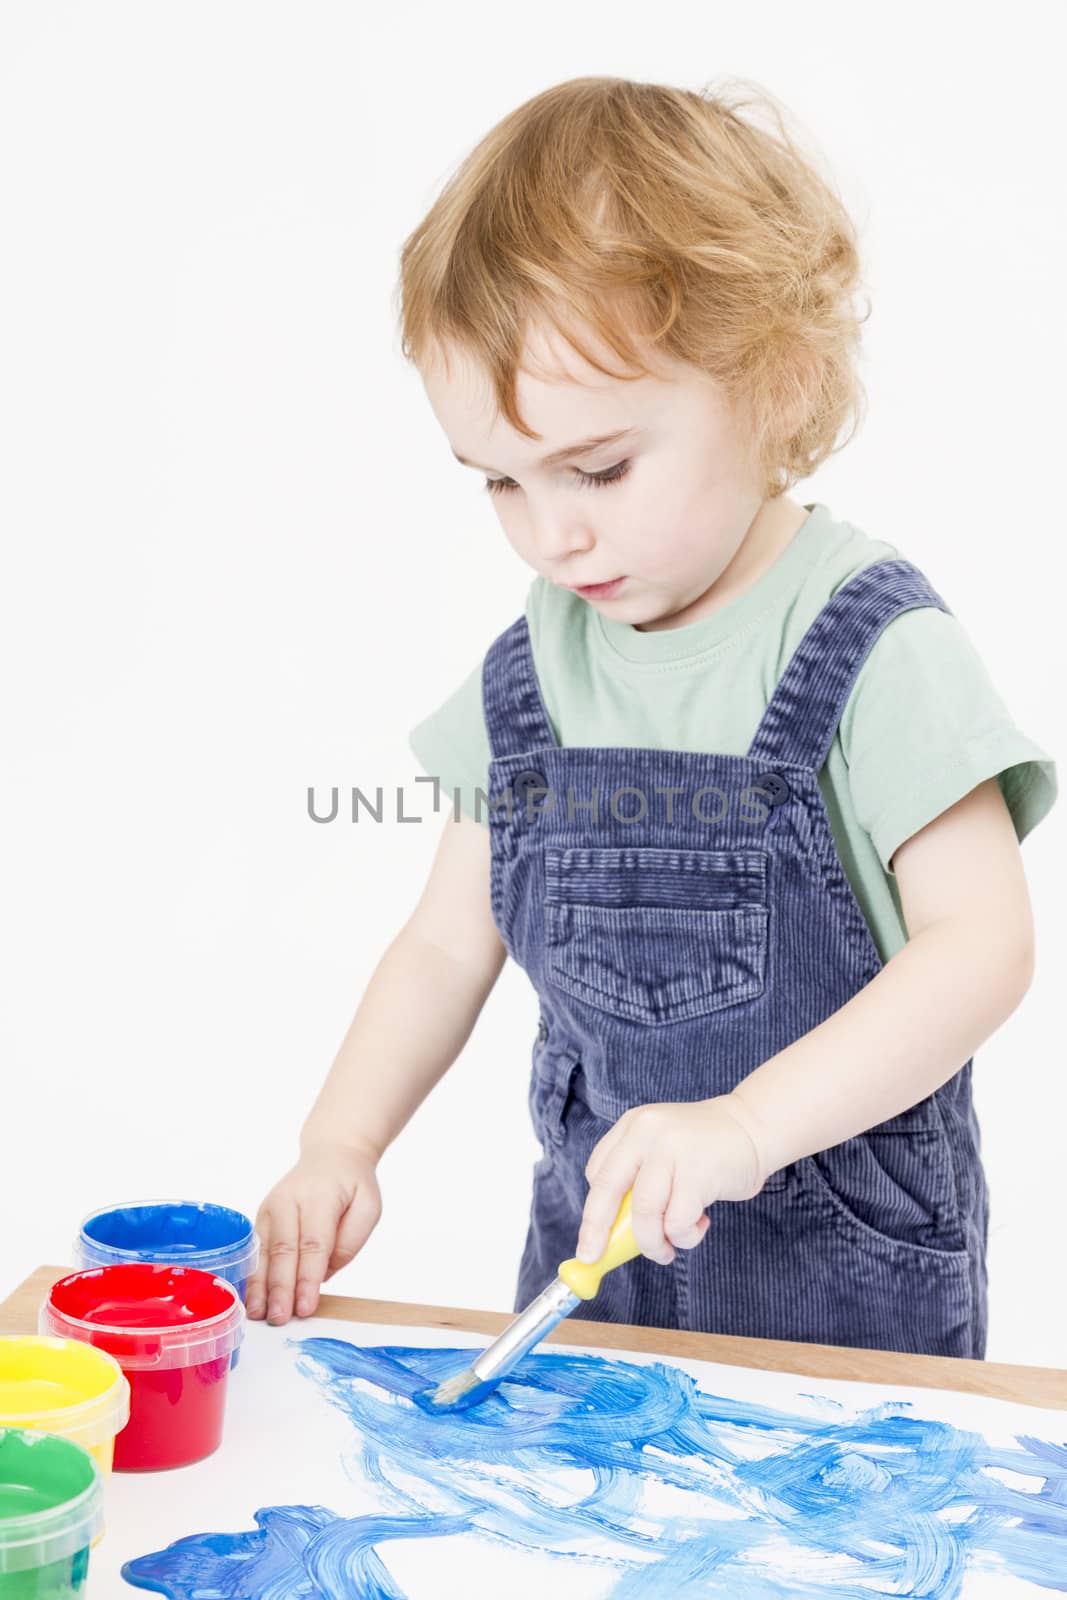 cute child making picture with brush and paint in light background